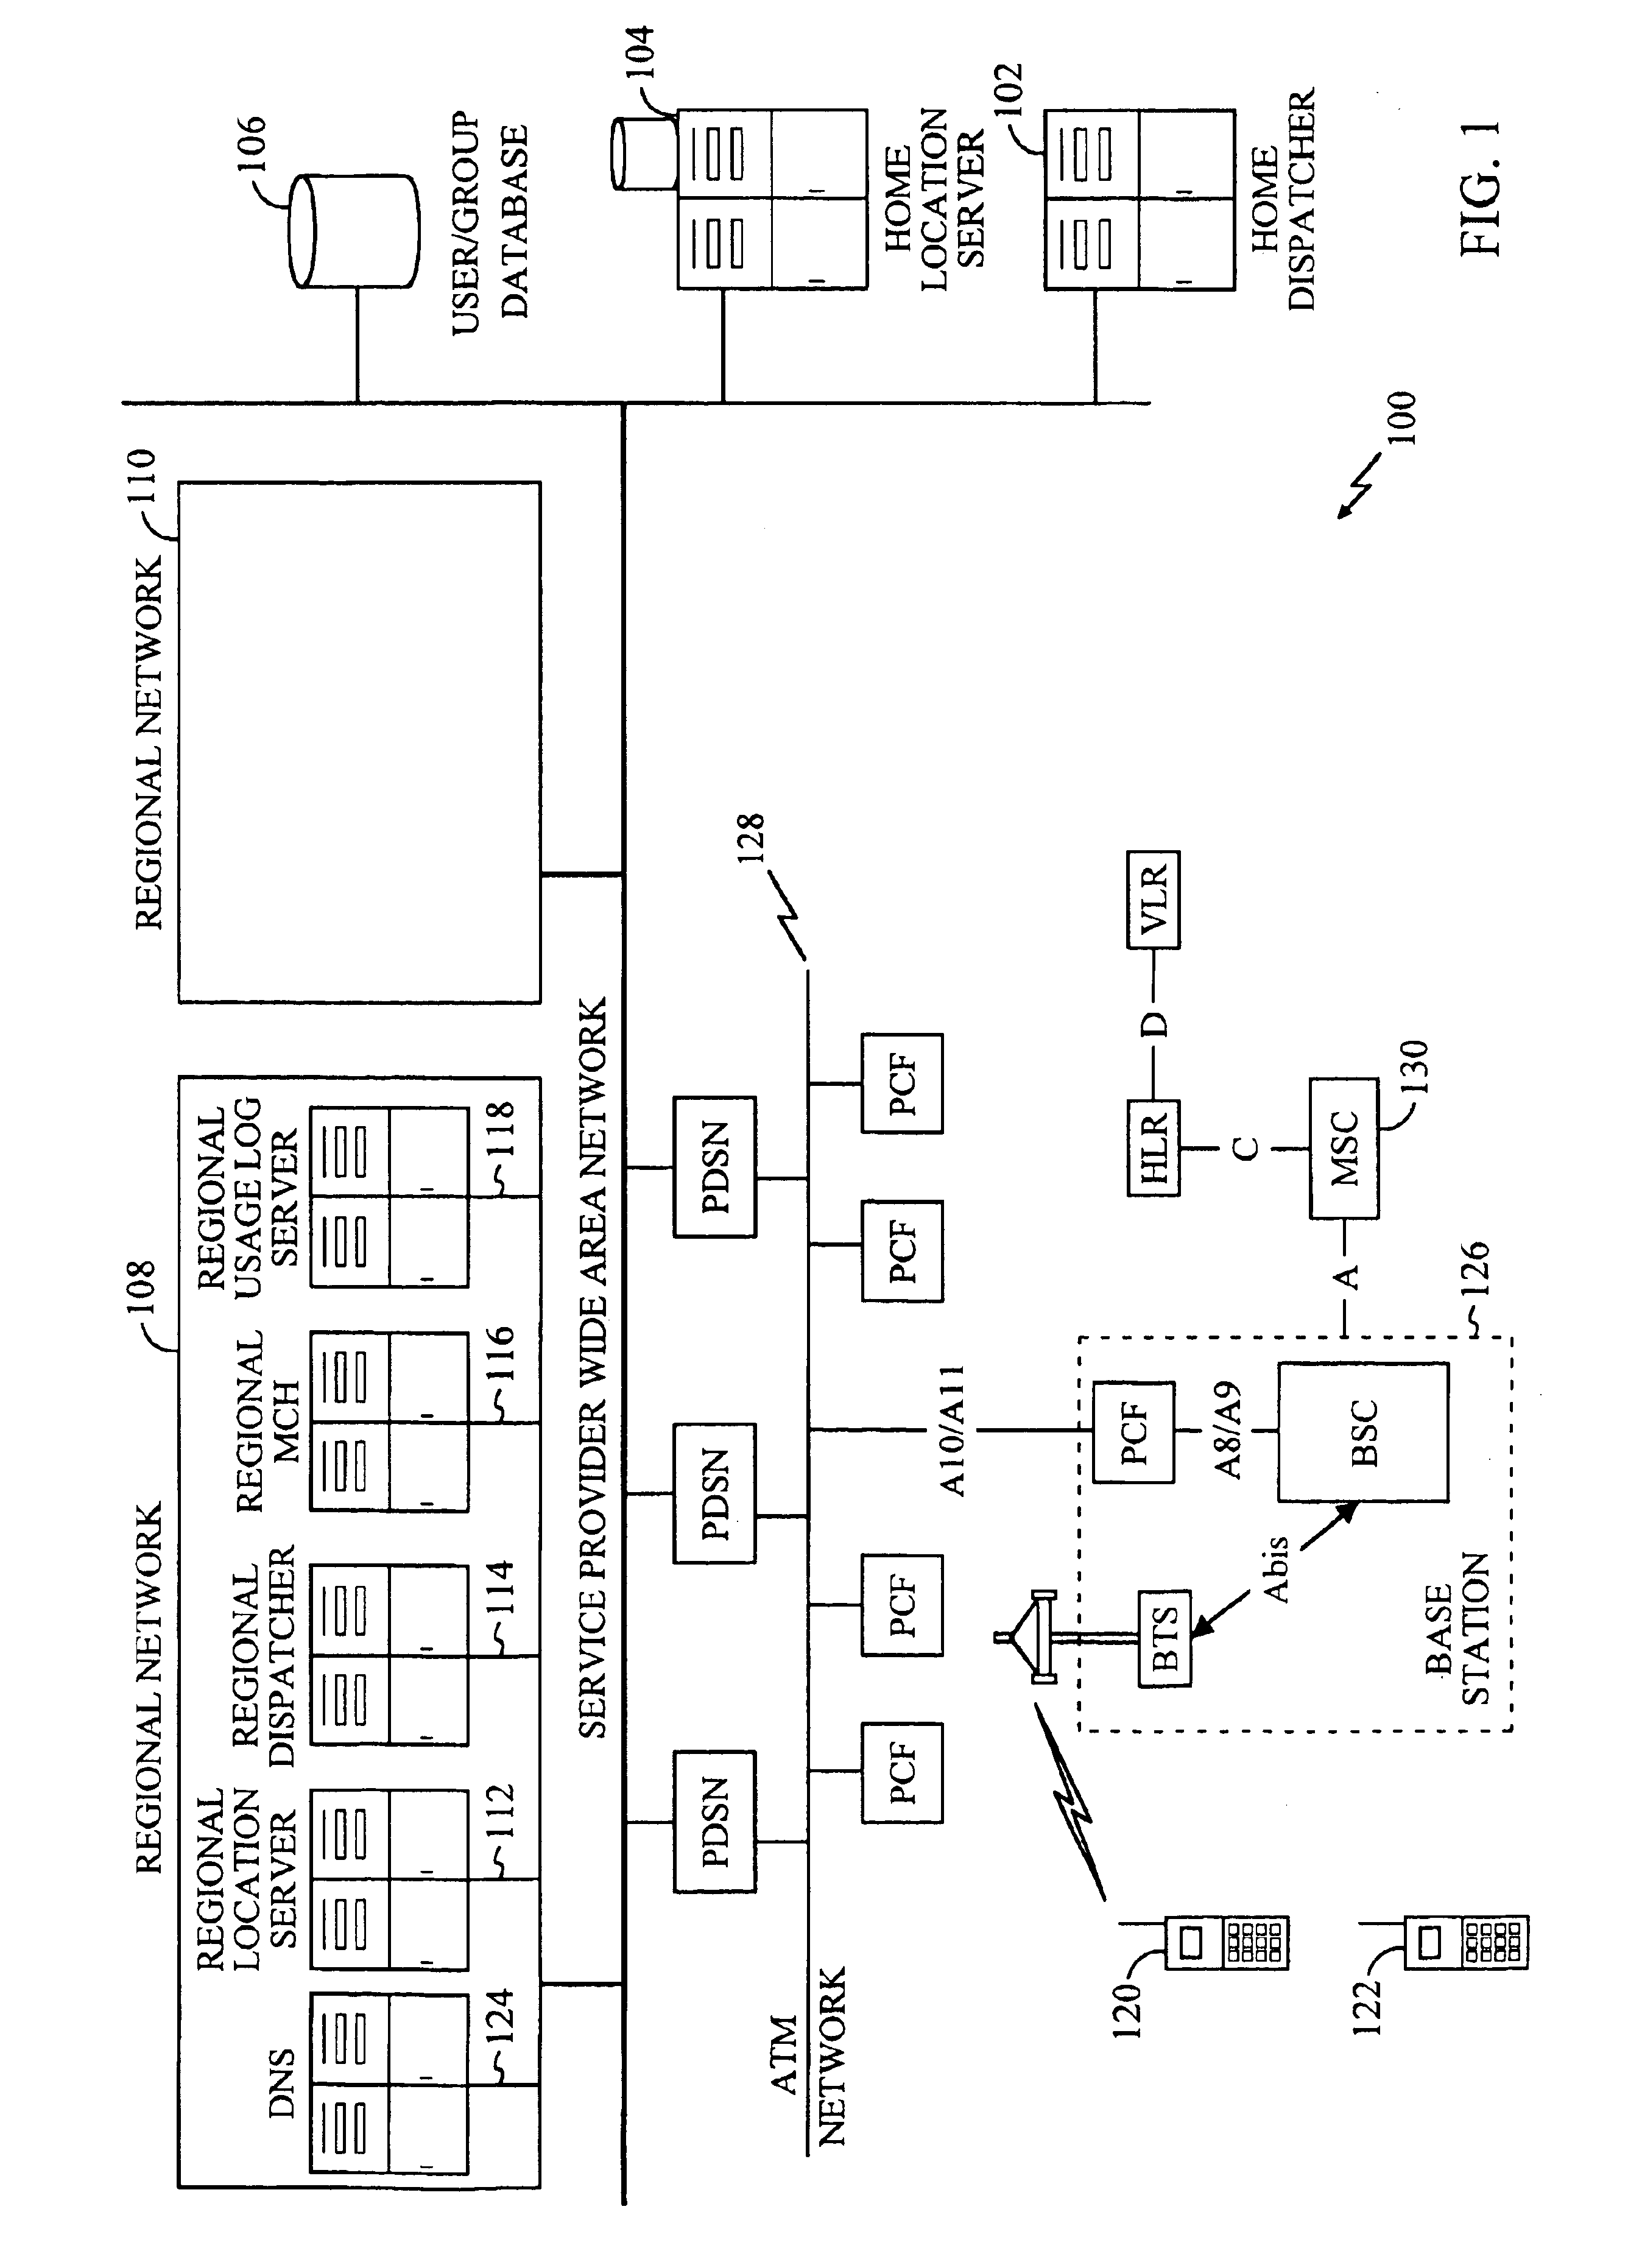 Method and an apparatus for adding a new member to an active group call in a group communication network